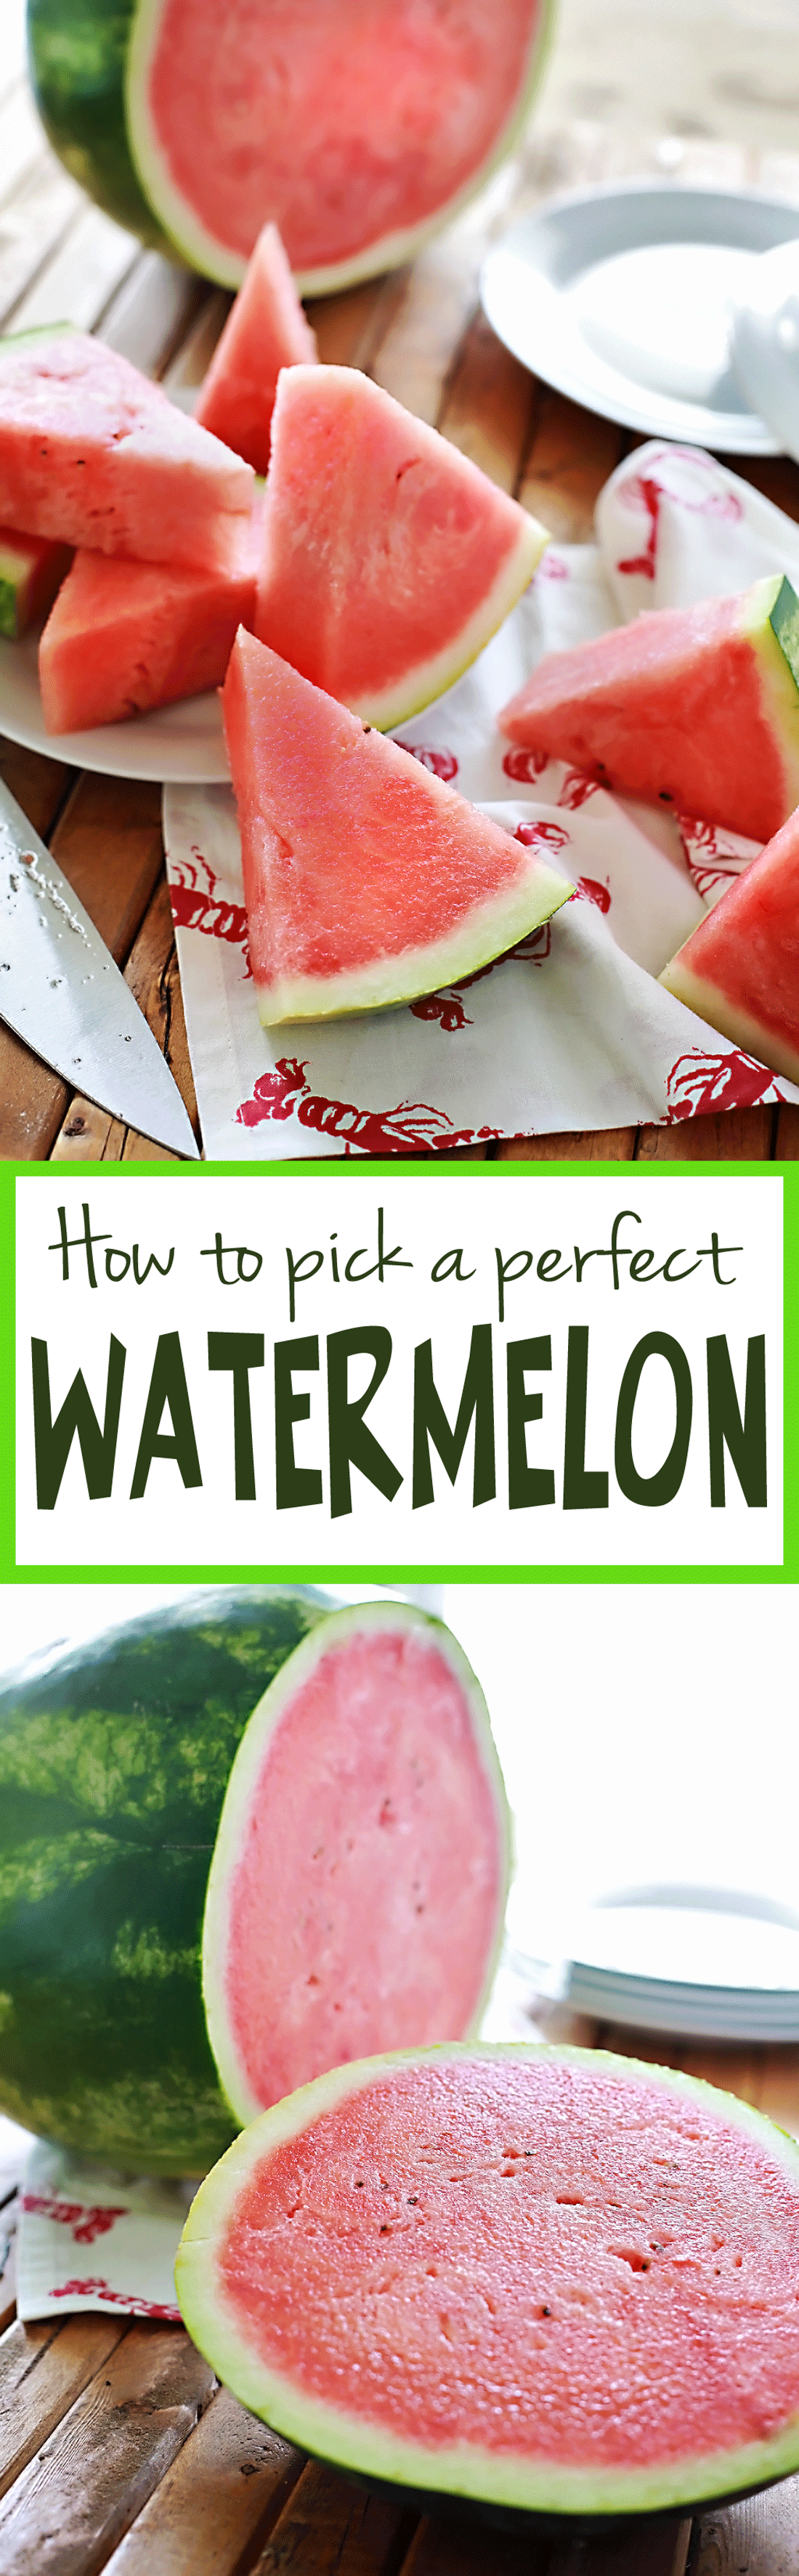 Watermelon: How to find the Perfect Watermelon | Tangled with Taste